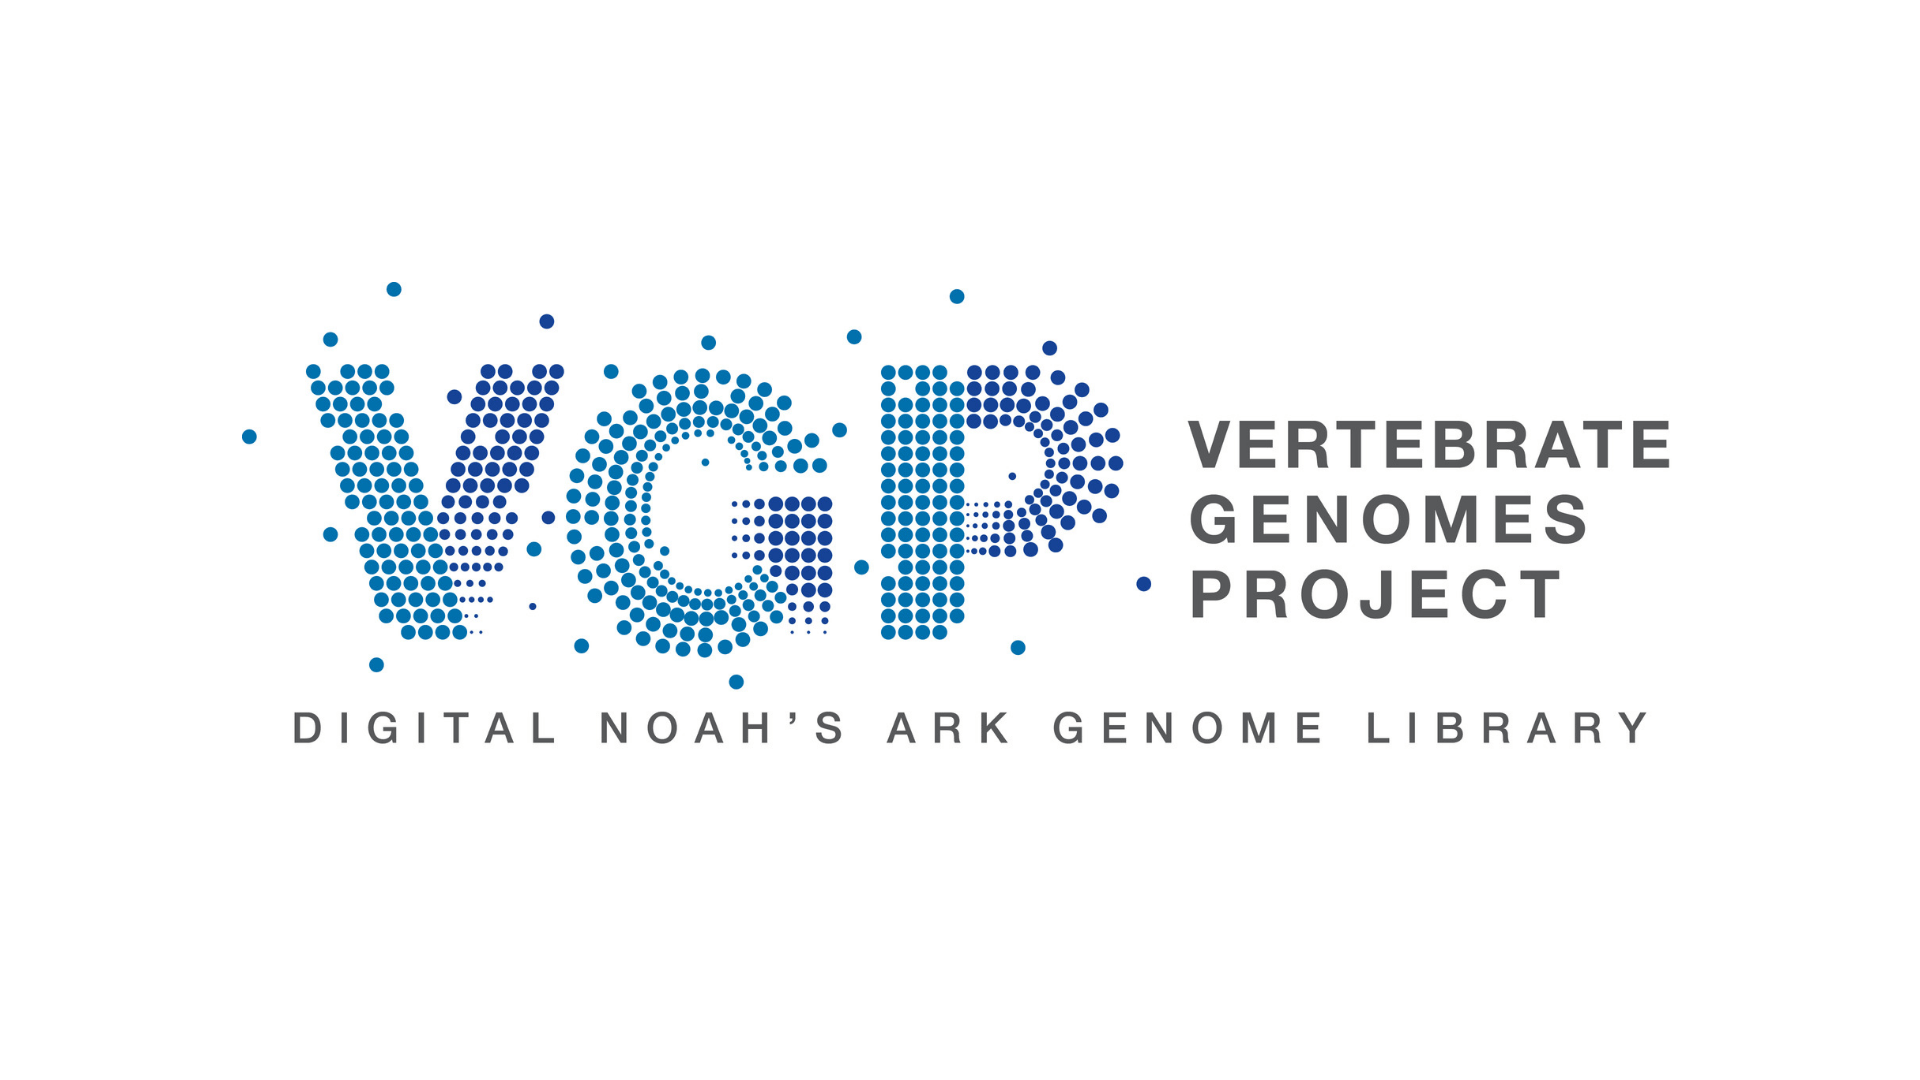 International Vertebrate Genomes Project releases first 15 high-quality reference genomes